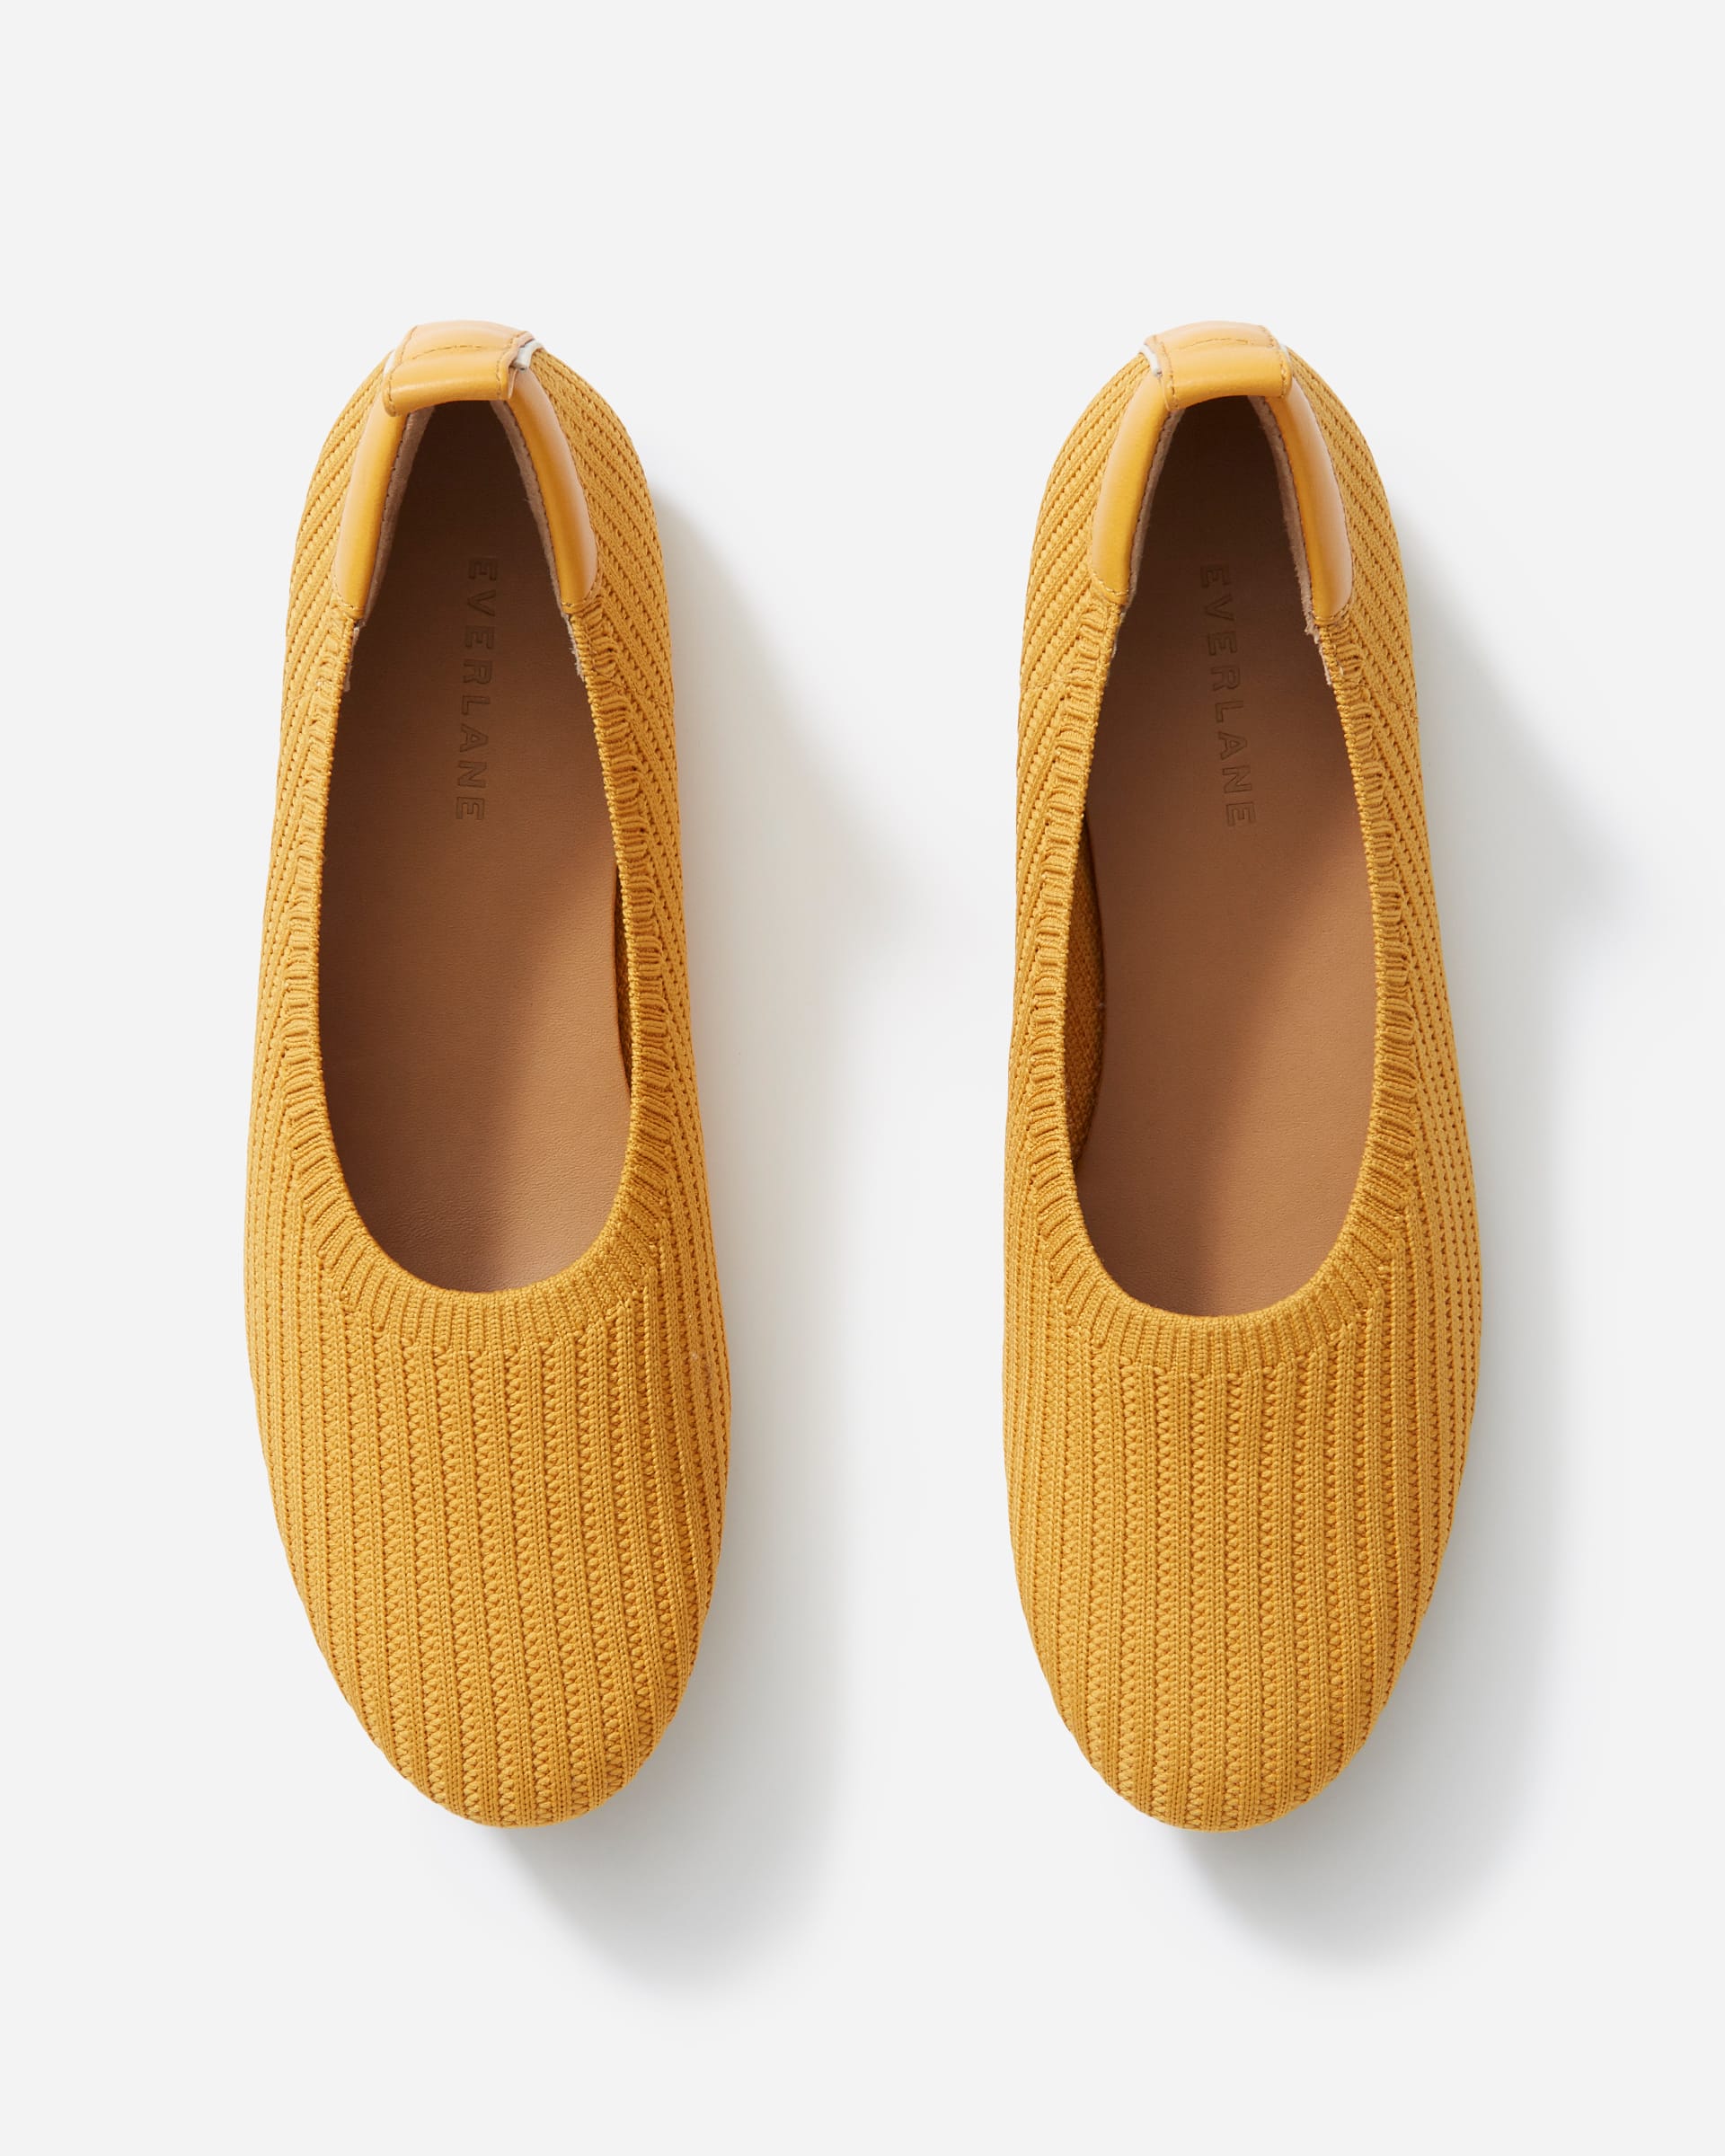 The Day Glove in ReKnit Yellow – Everlane